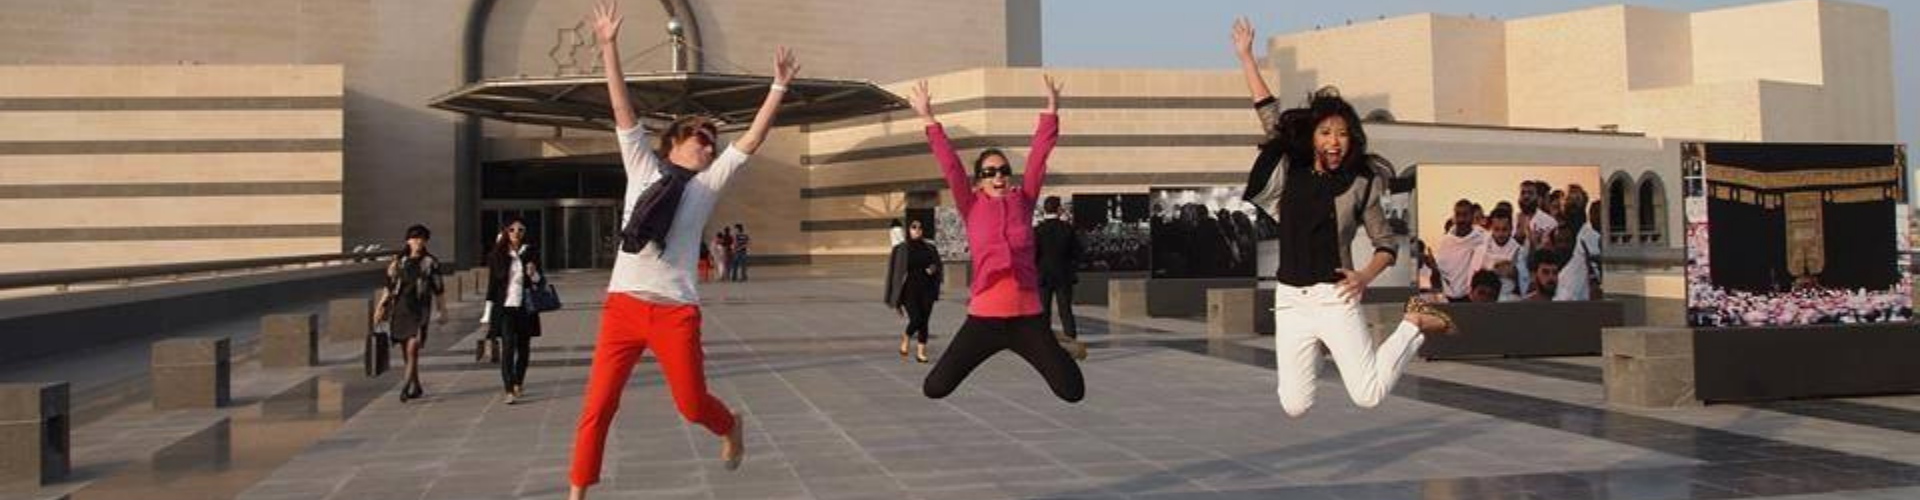 students leaping in front of building